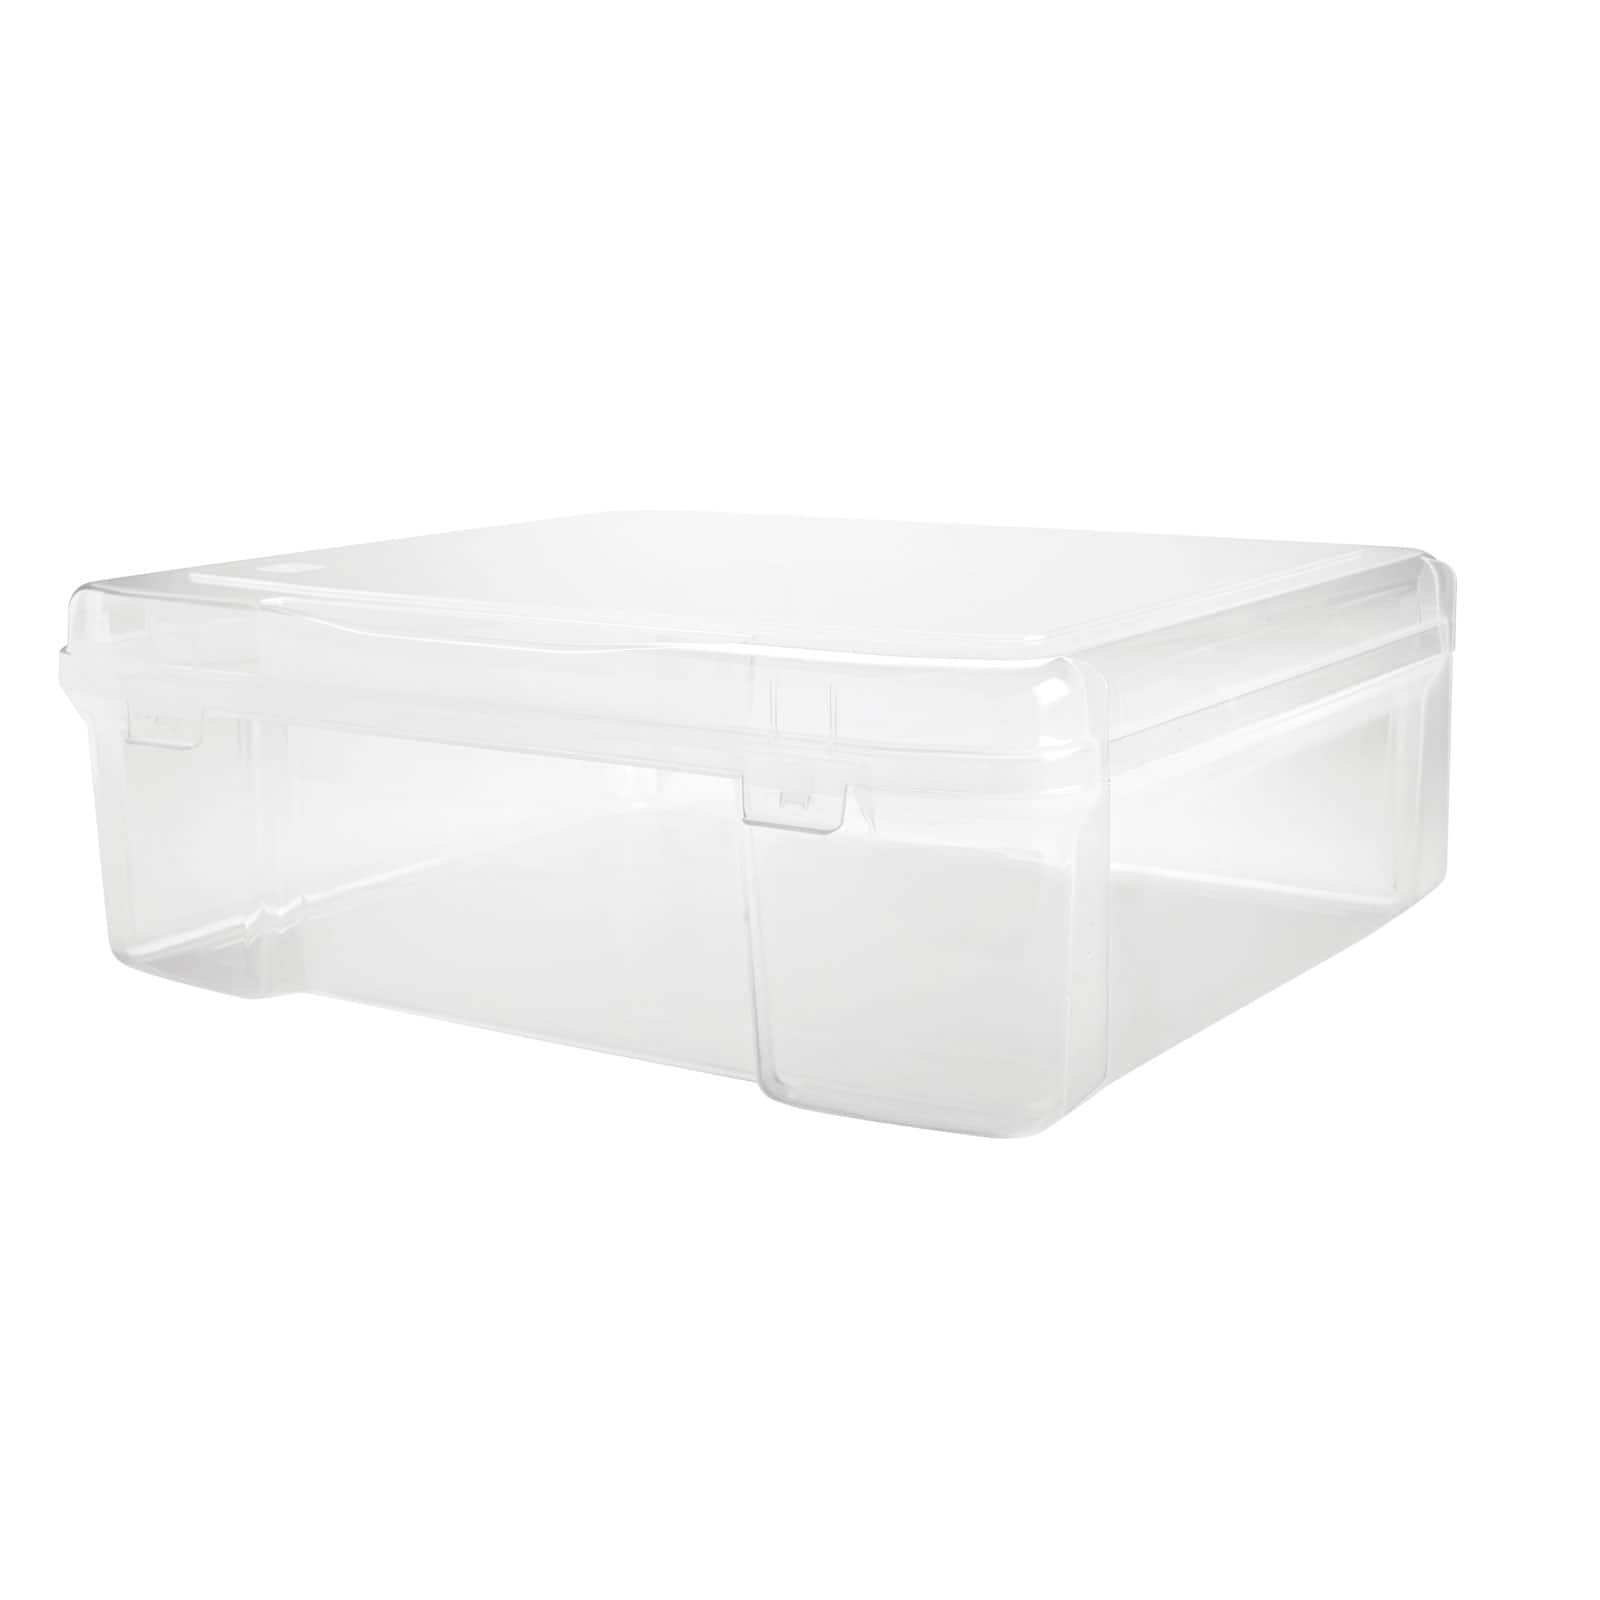 8 Pack: 12" x 12" Storage Keeper by Simply Tidy™ | Michaels